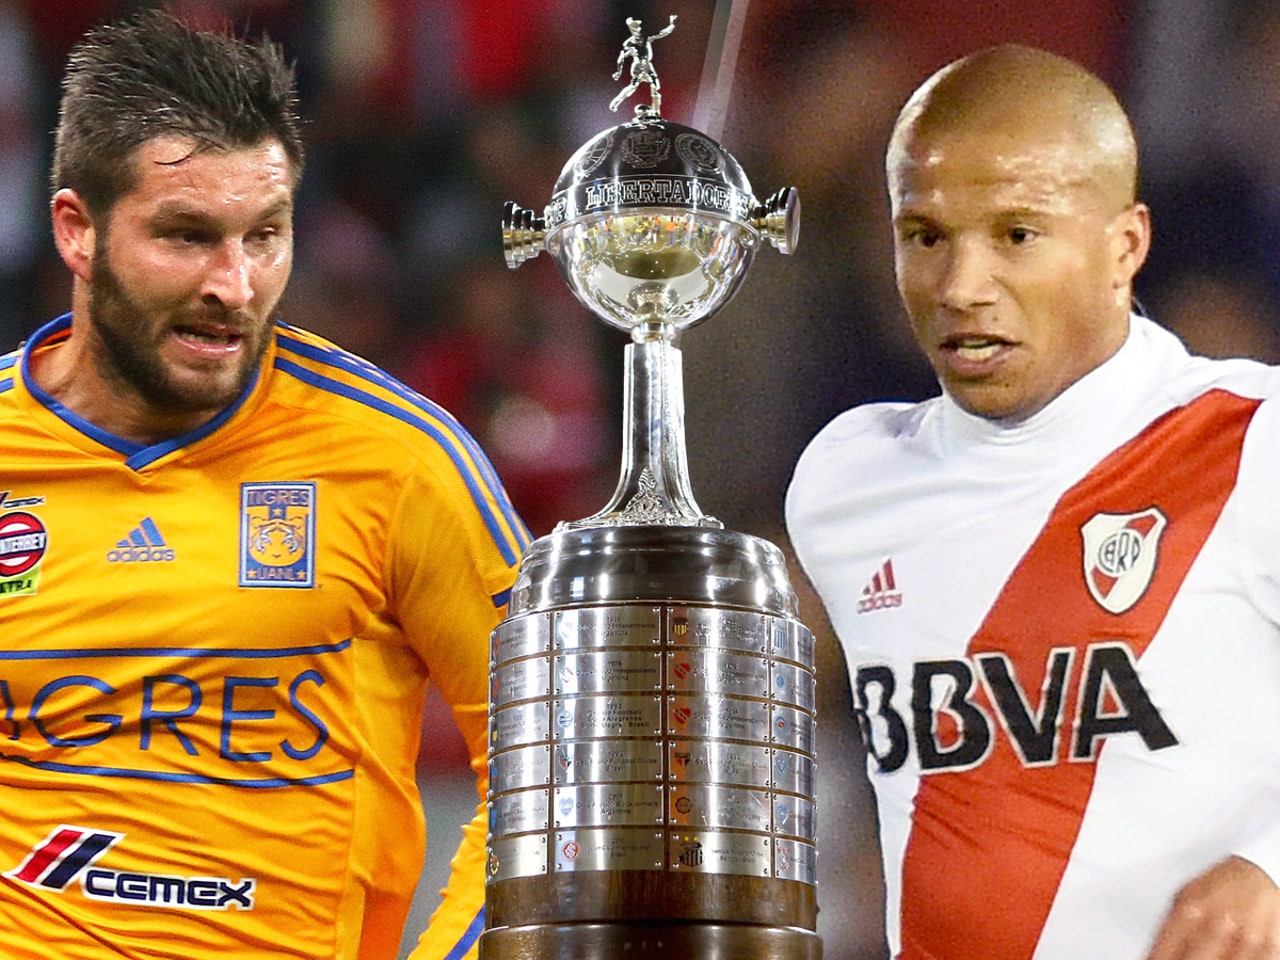 Copa Libertadores remaining teams best perfomances in the history